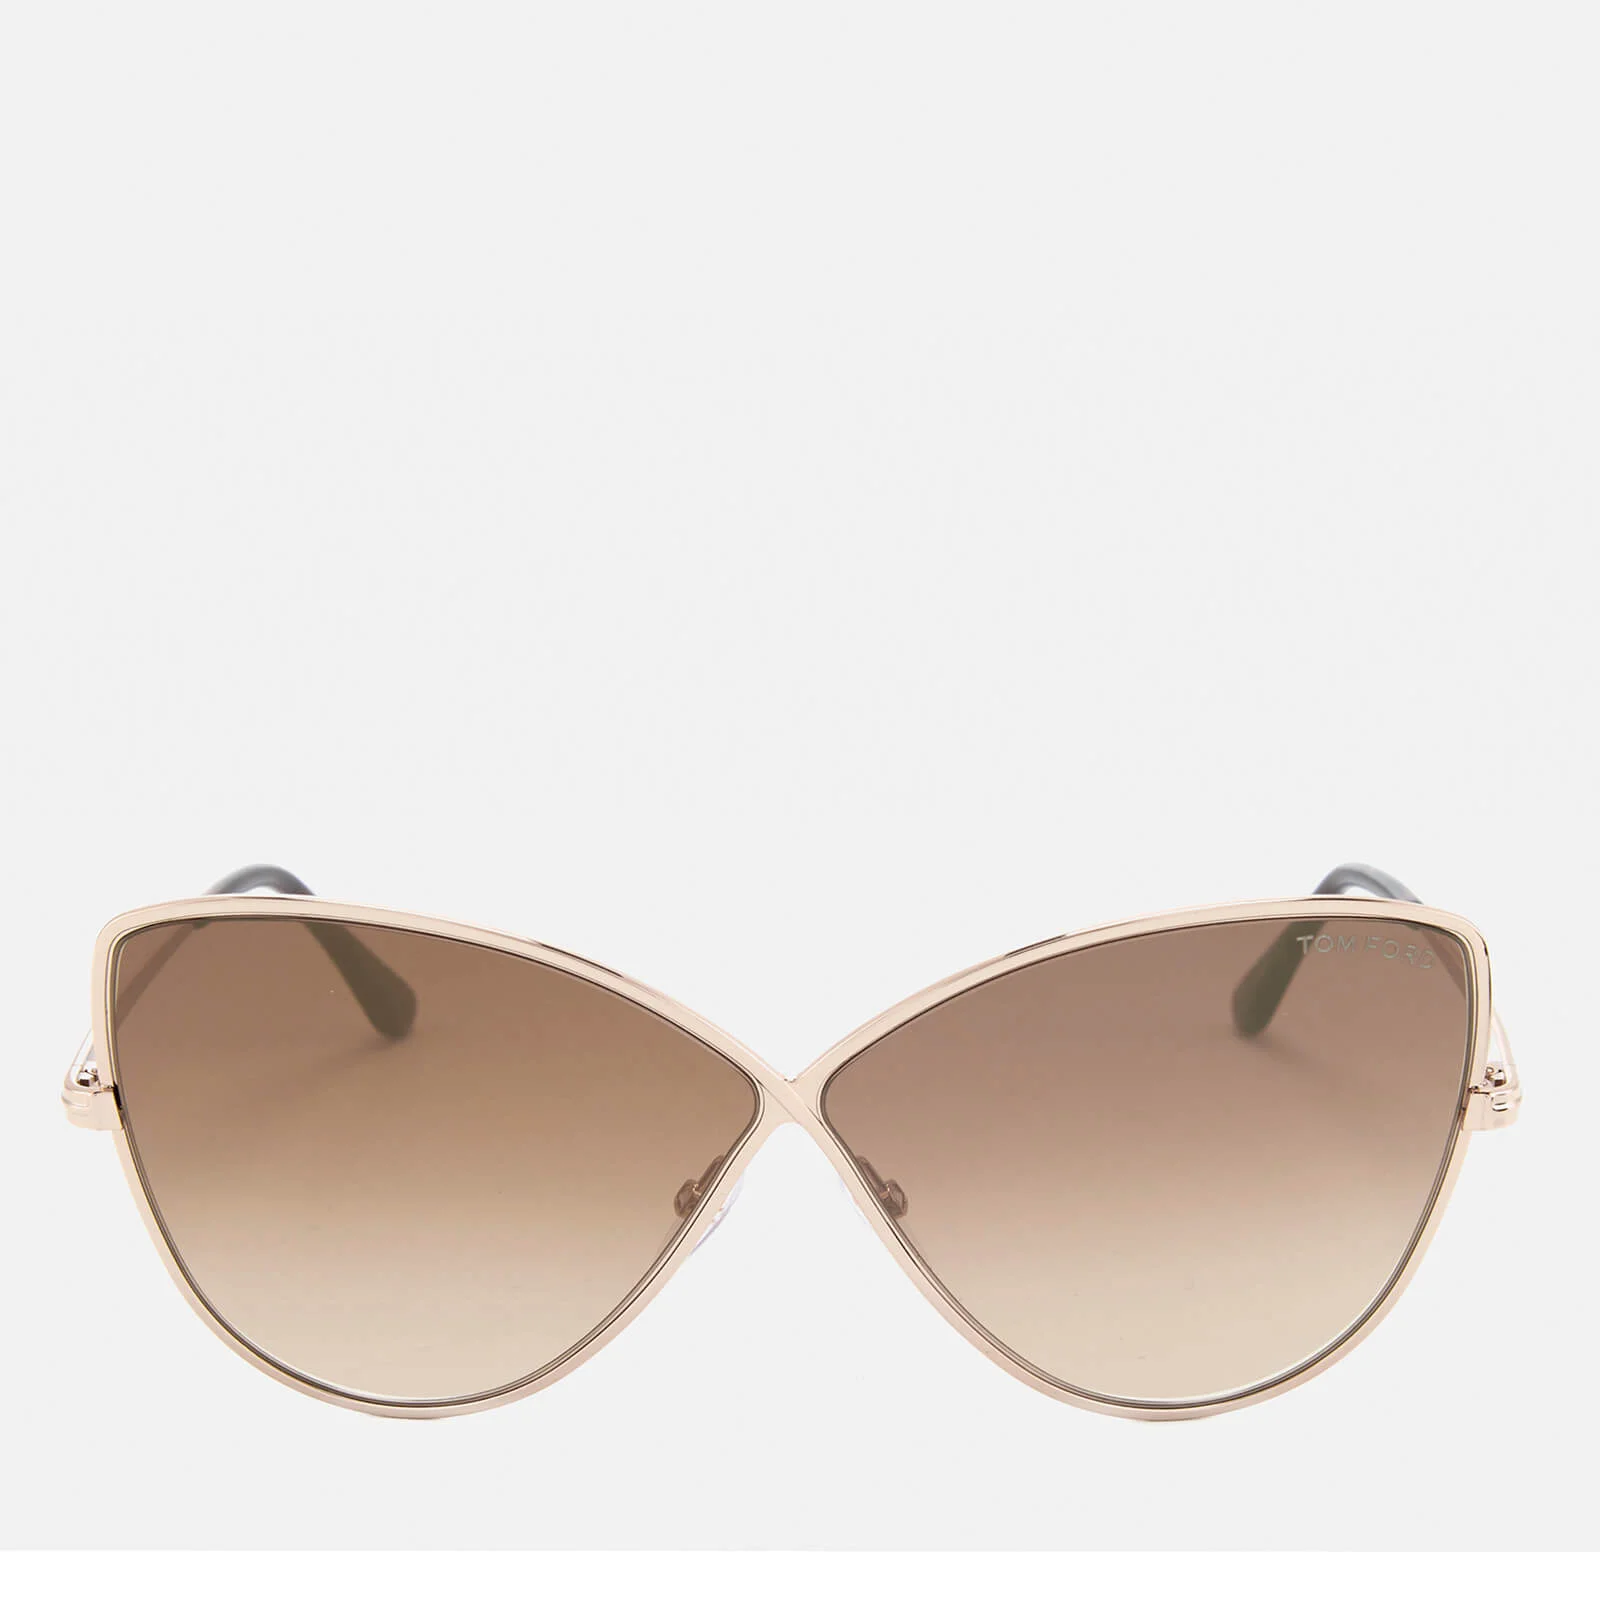 Tom Ford Women's Elise Butterfly Shape Sunglasses - Rose Gold/Brown Mirror Image 1